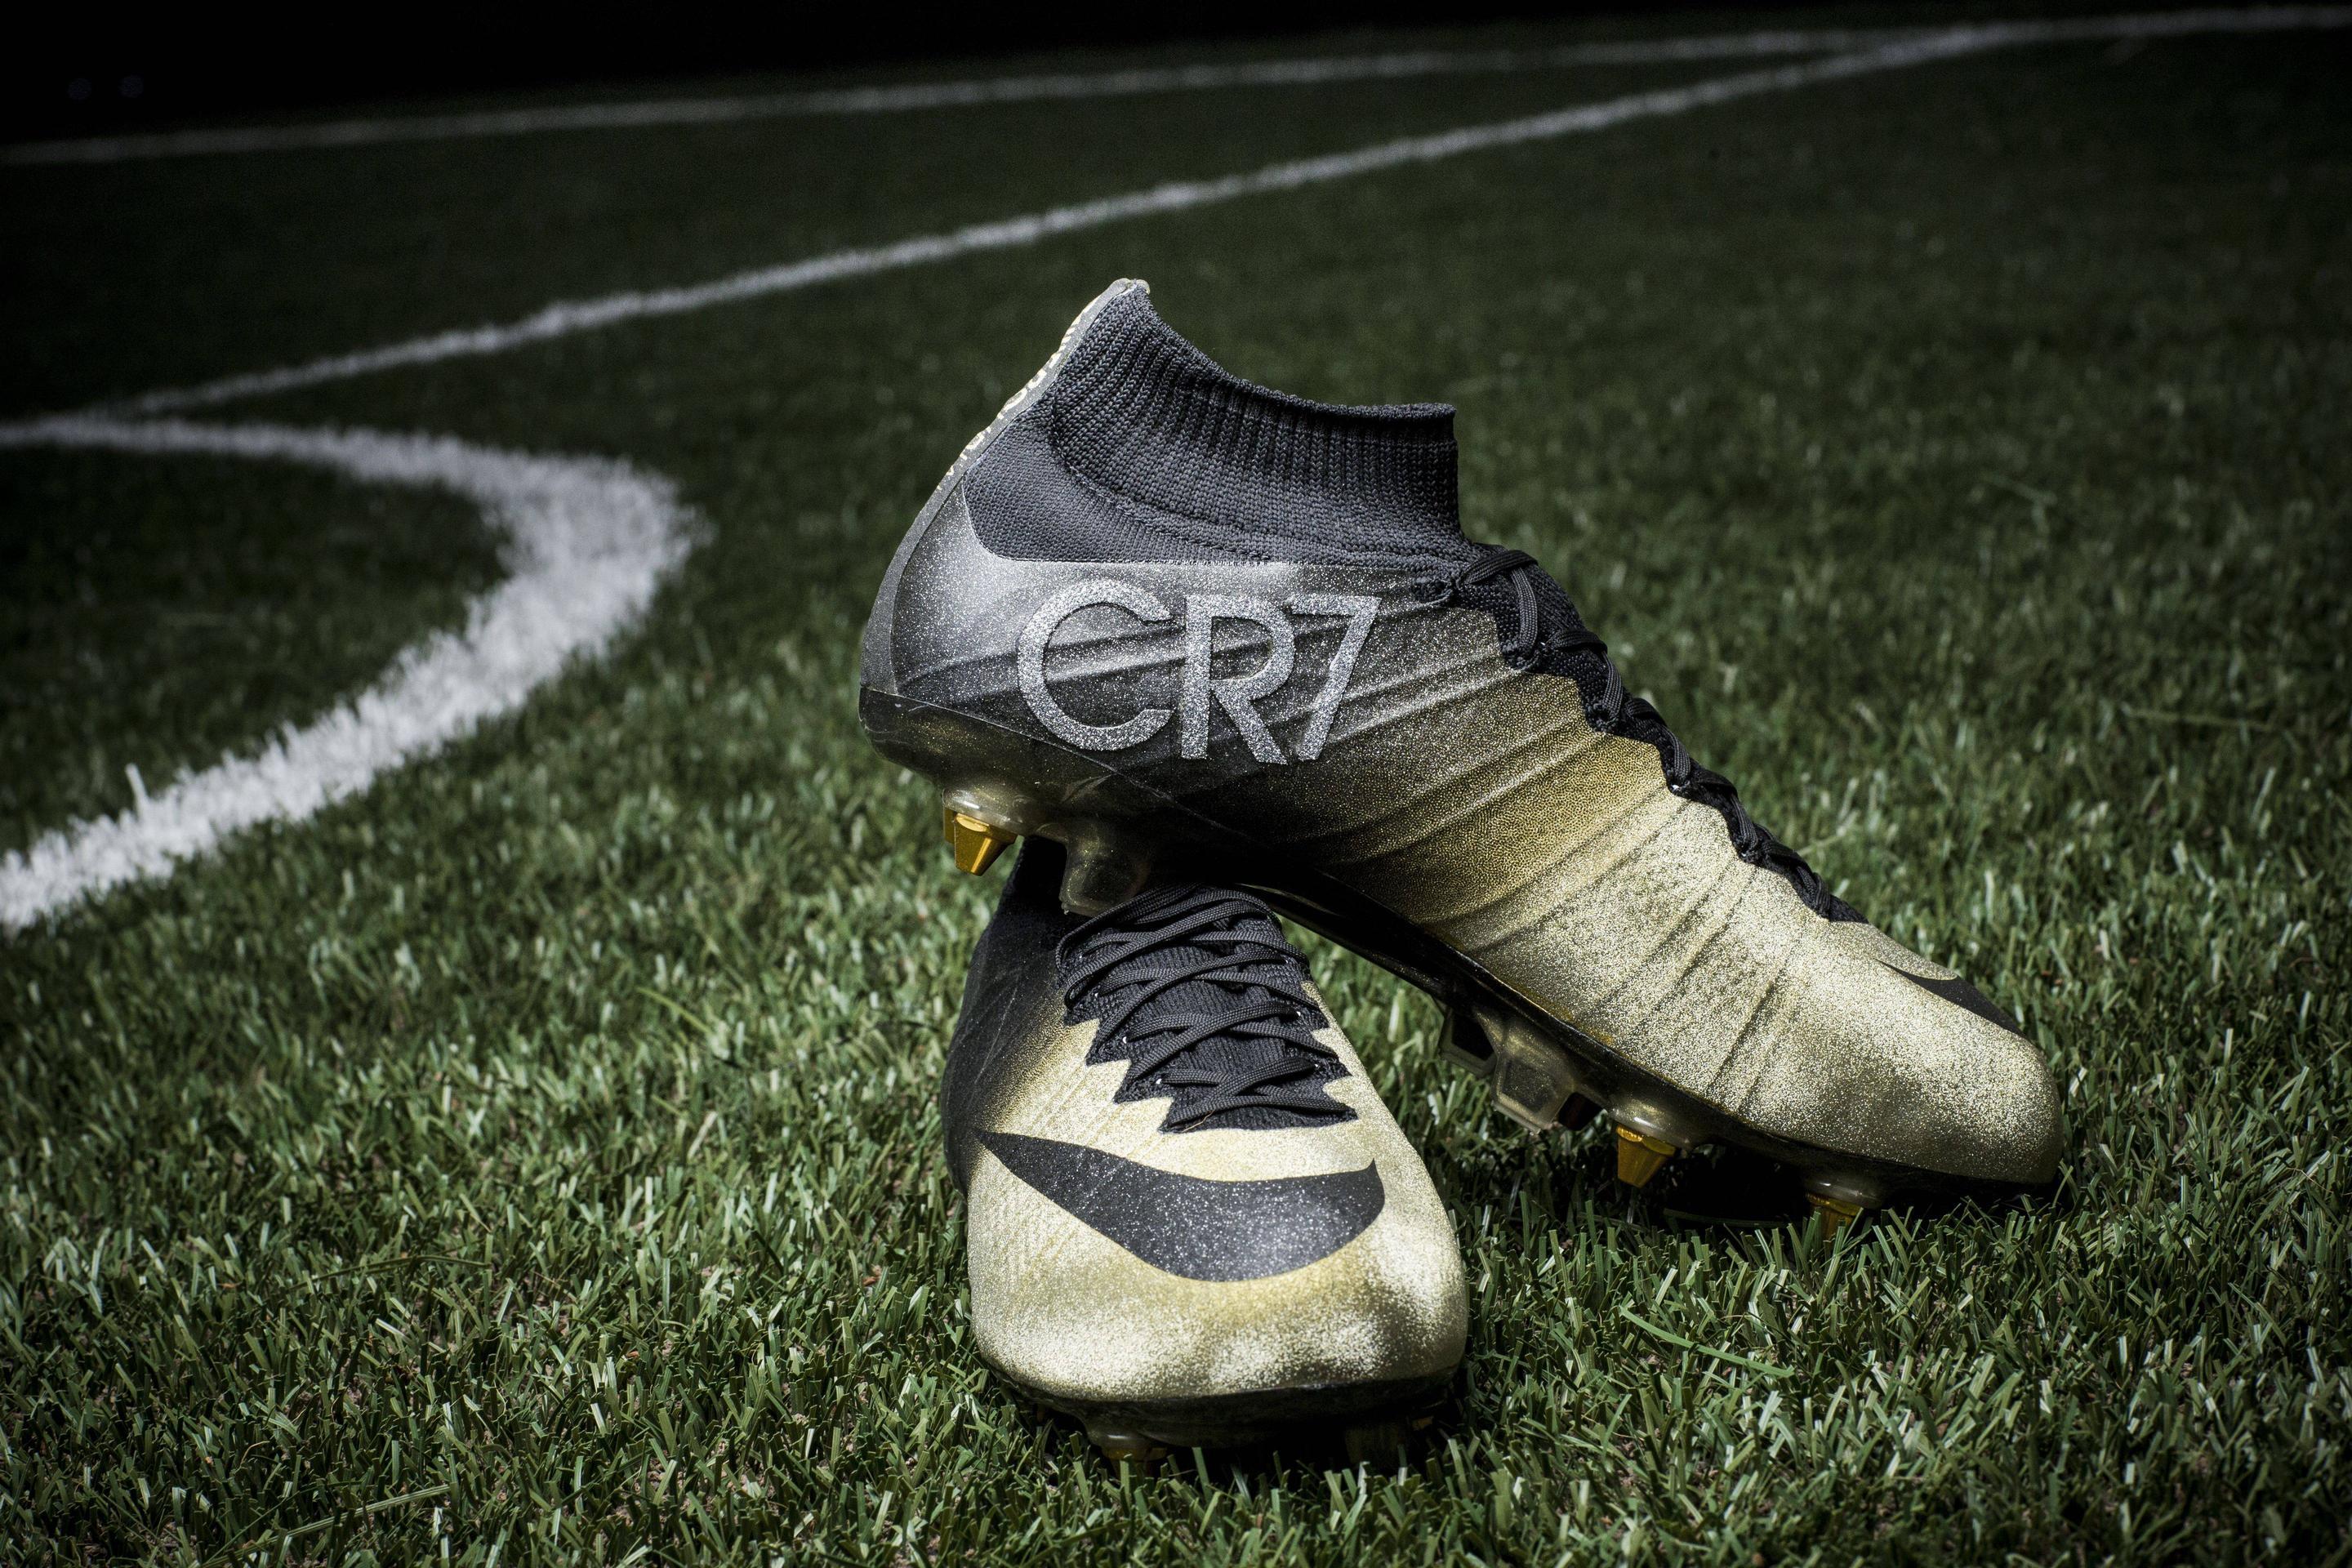 Nike celebrate Ronaldo&;s new Golden Ball with a pair of new golden